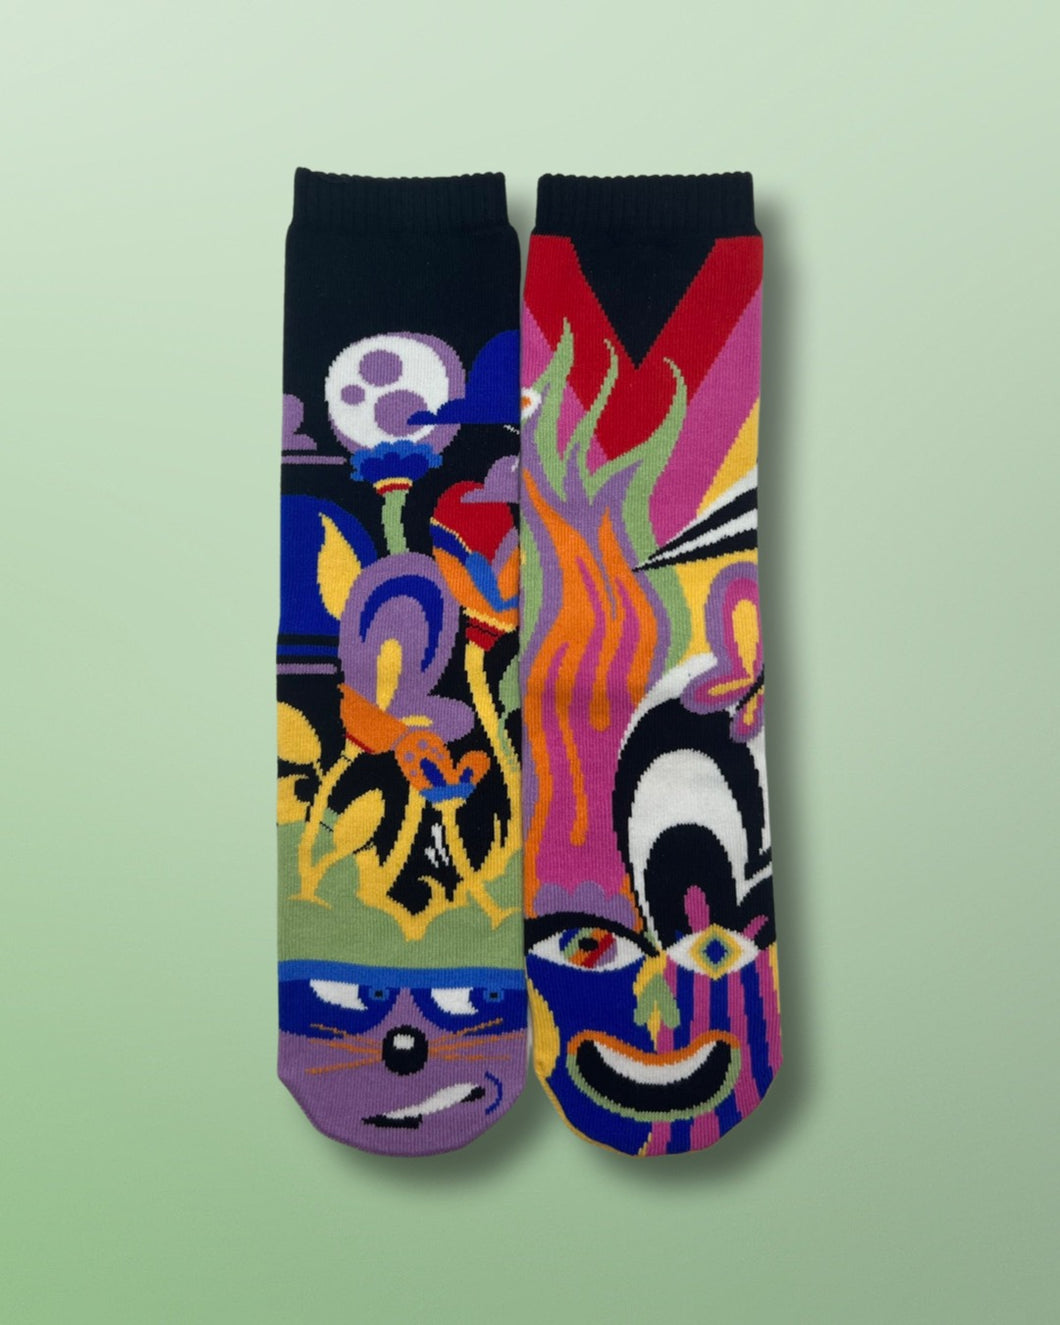 Shy & Outgoing | Adult Collectible Socks by Jason Naylor